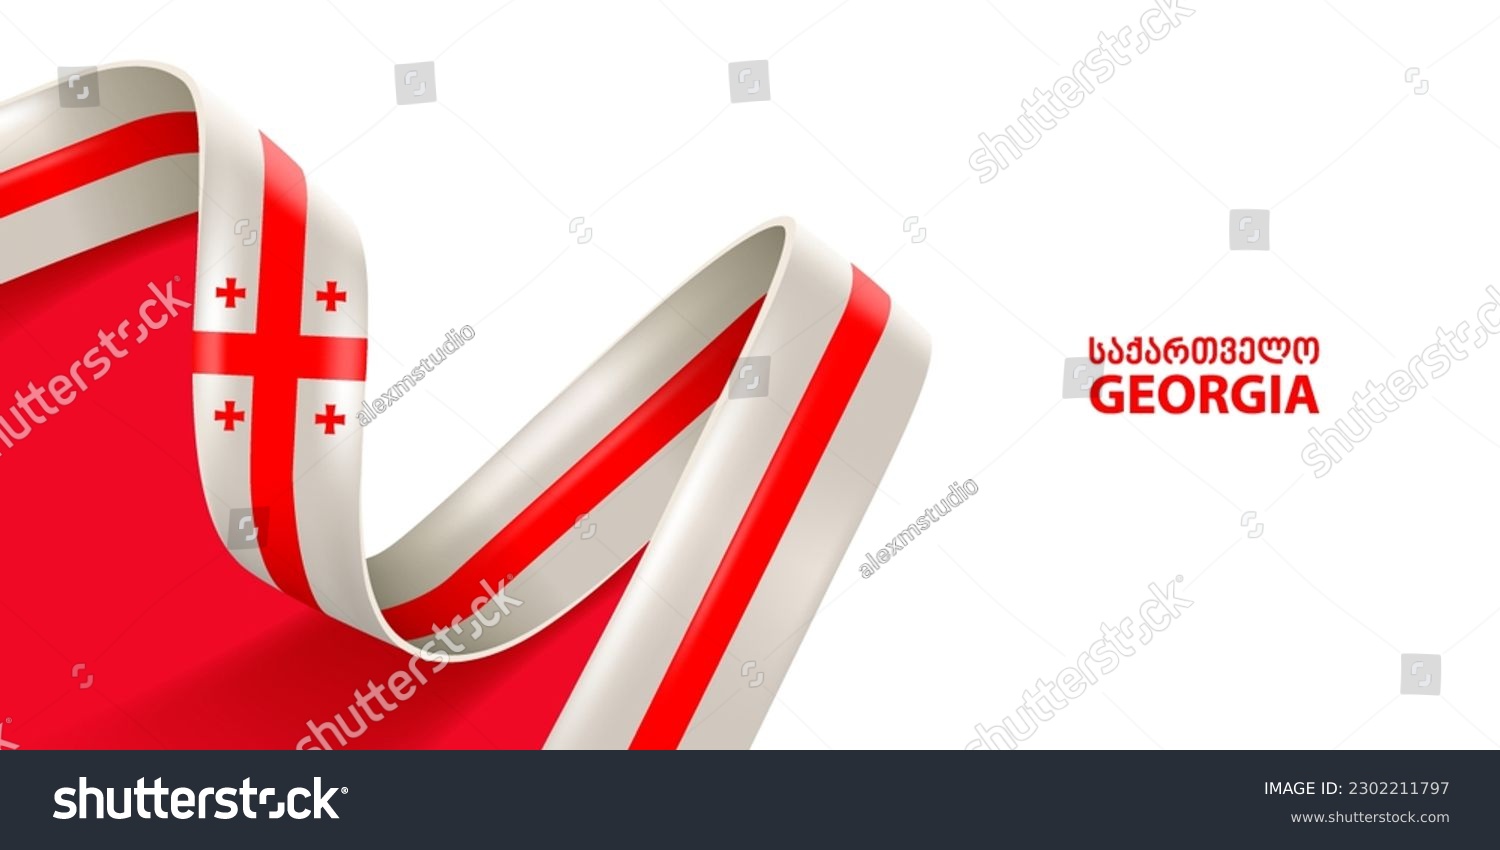 SVG of Georgia ribbon flag. Bent waving ribbon in colors of the Georgia national flag. National flag background. svg